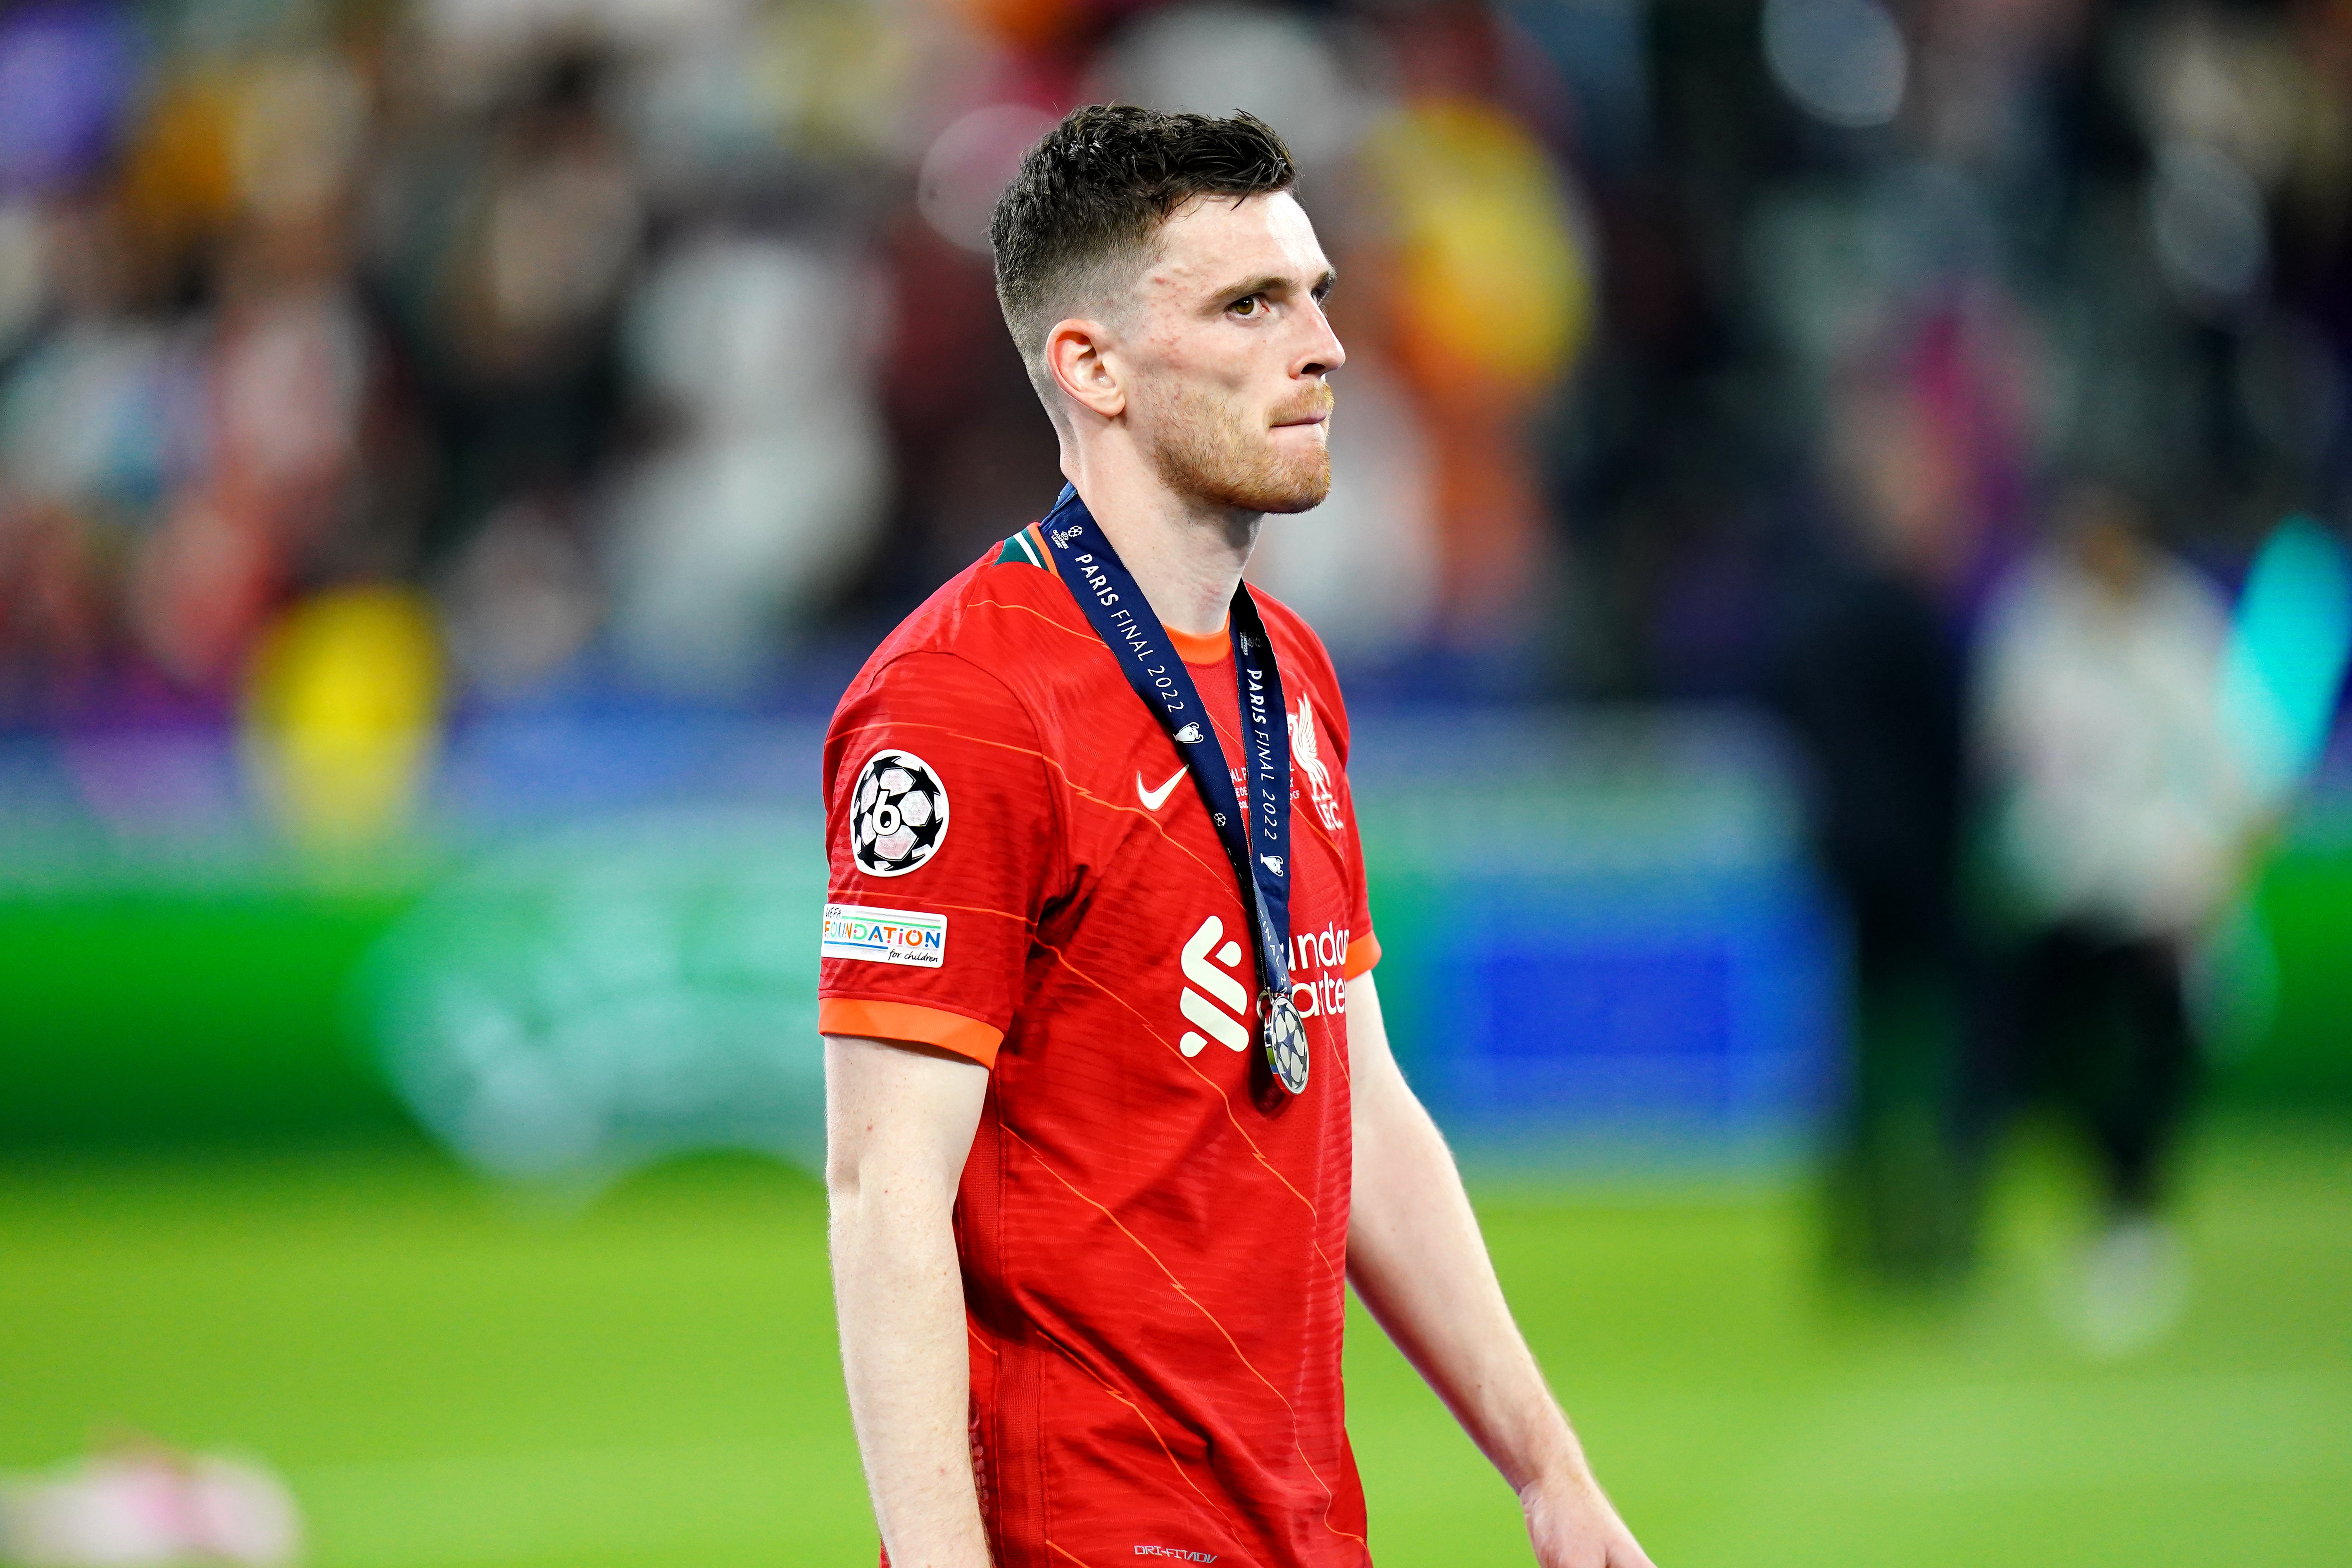 Liverpool defender Andy Robertson explains what happened when